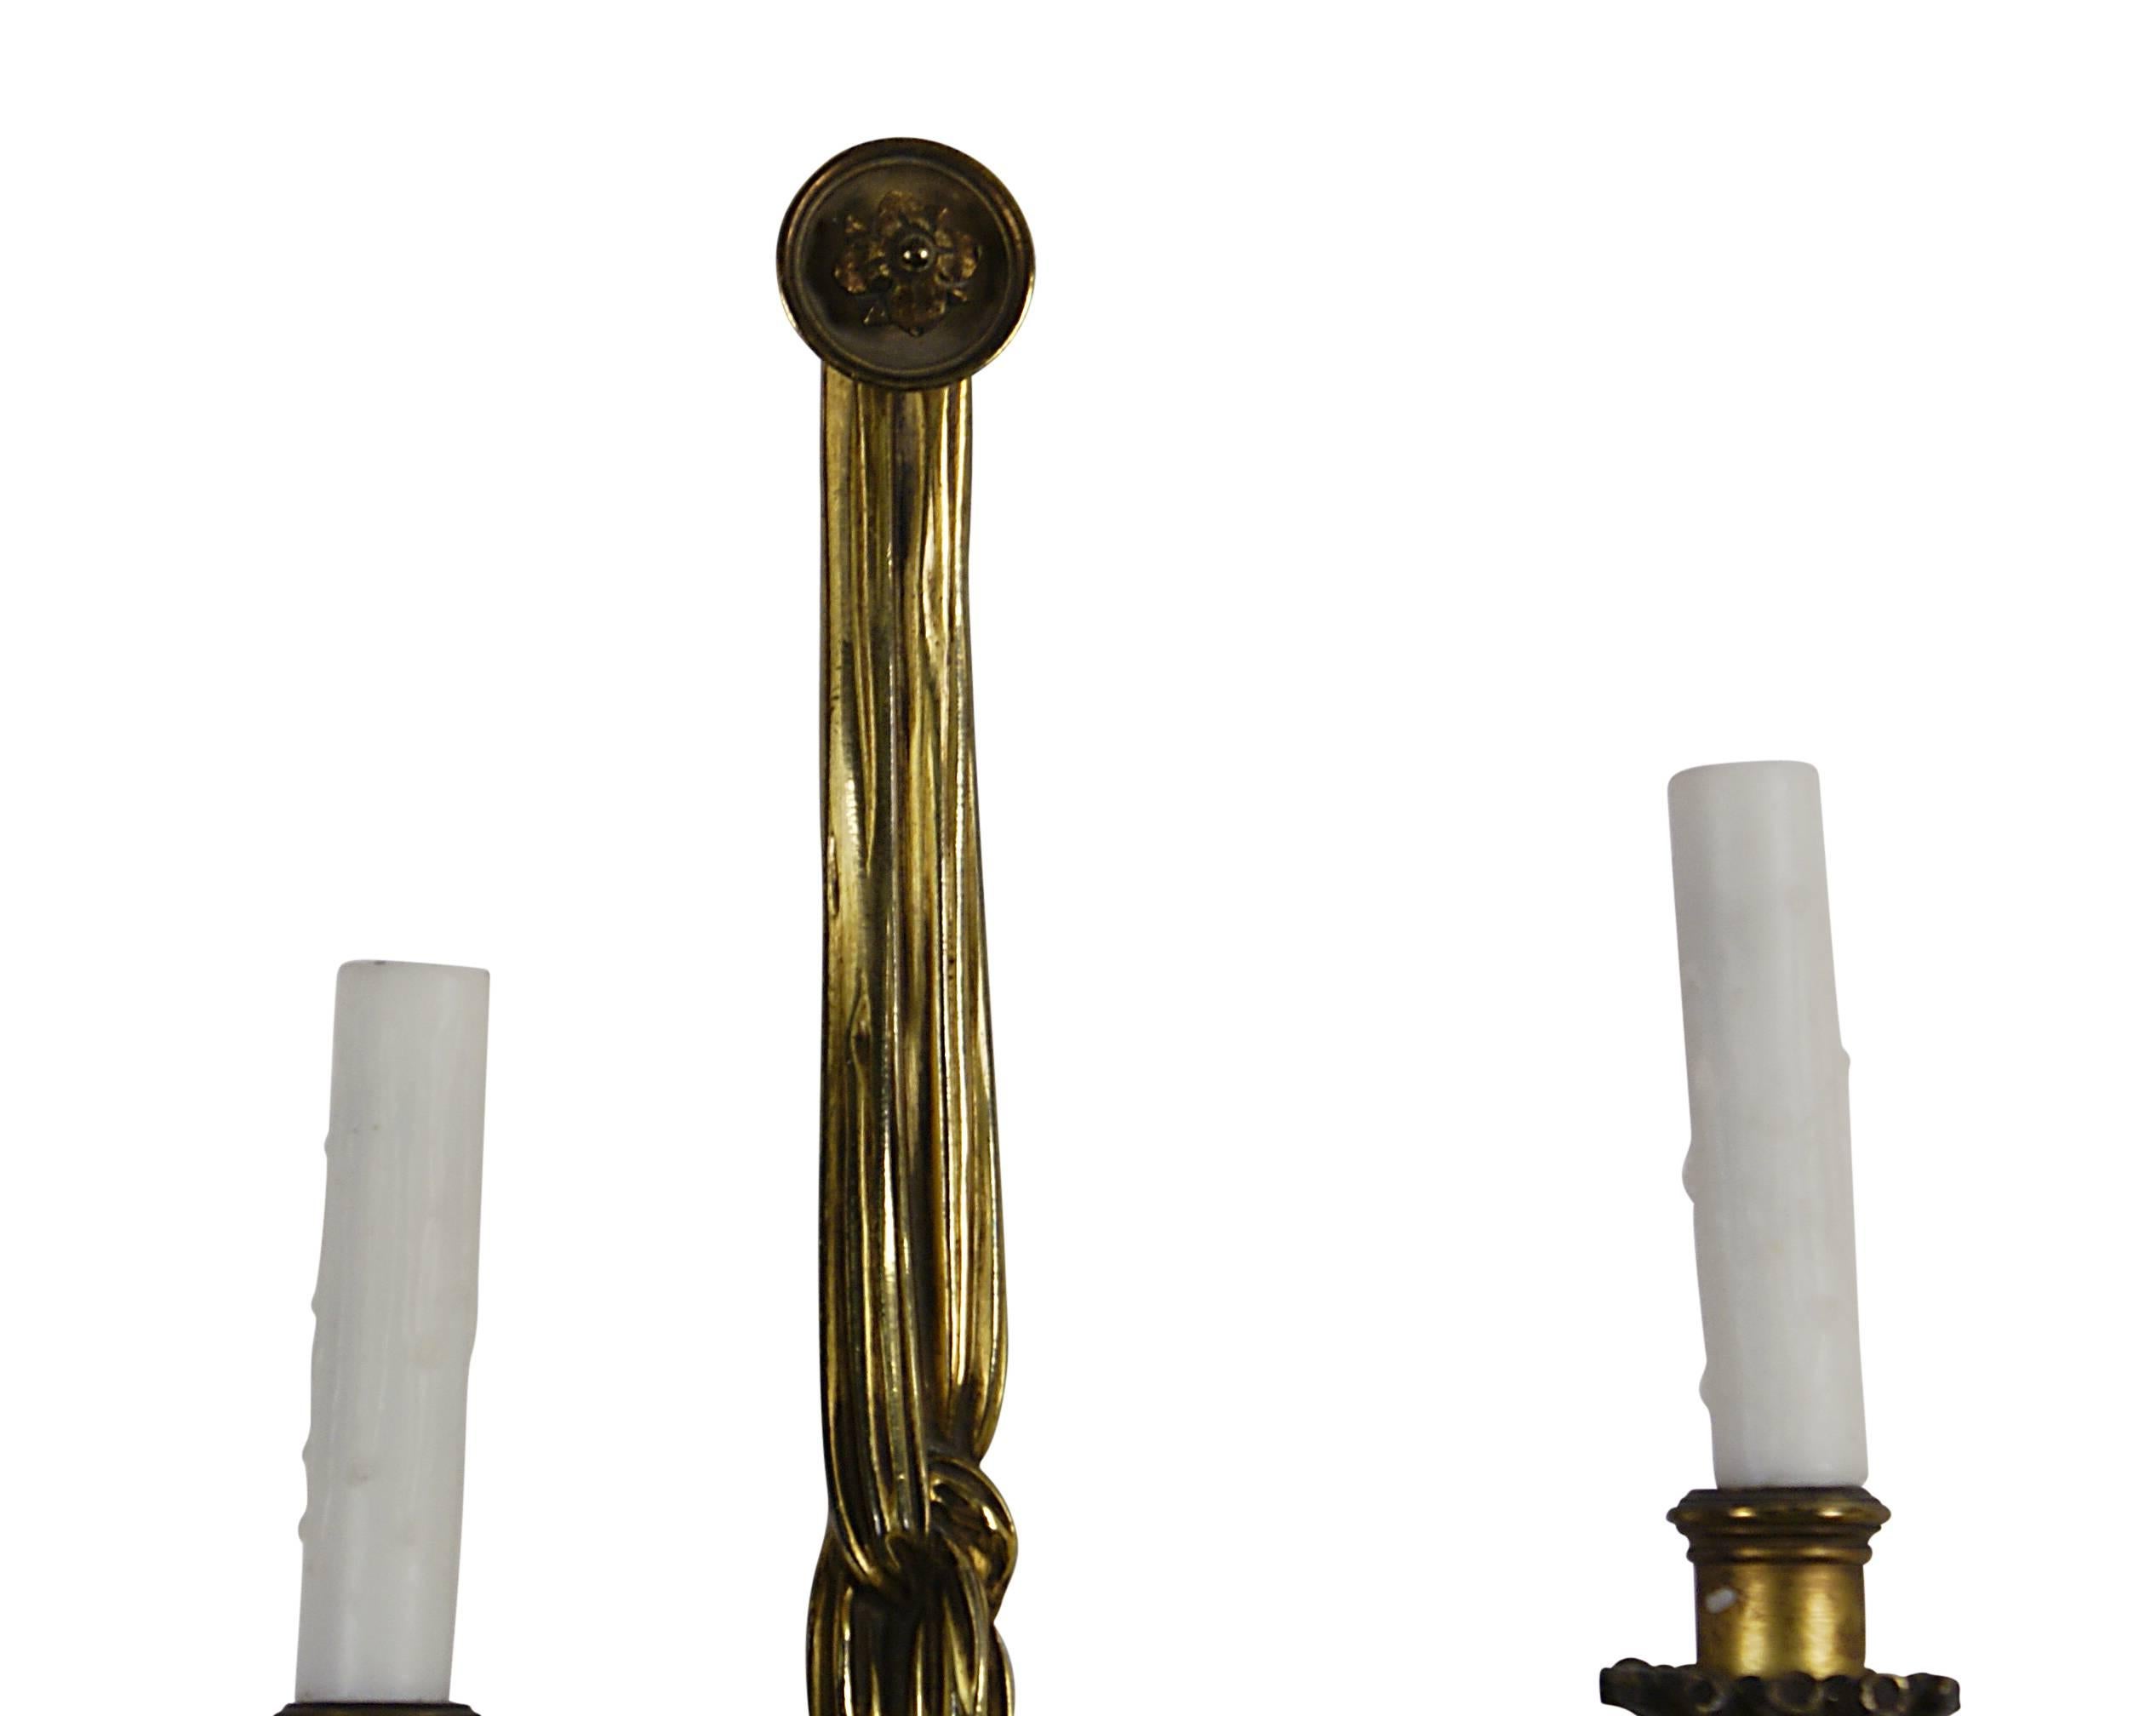 A beautiful pair of gilt bronze two-light sconces now wired for electricity. These are in the style of Louis XVI and have great detail with mellowed patina. From a good collection formed about 100 years ago.